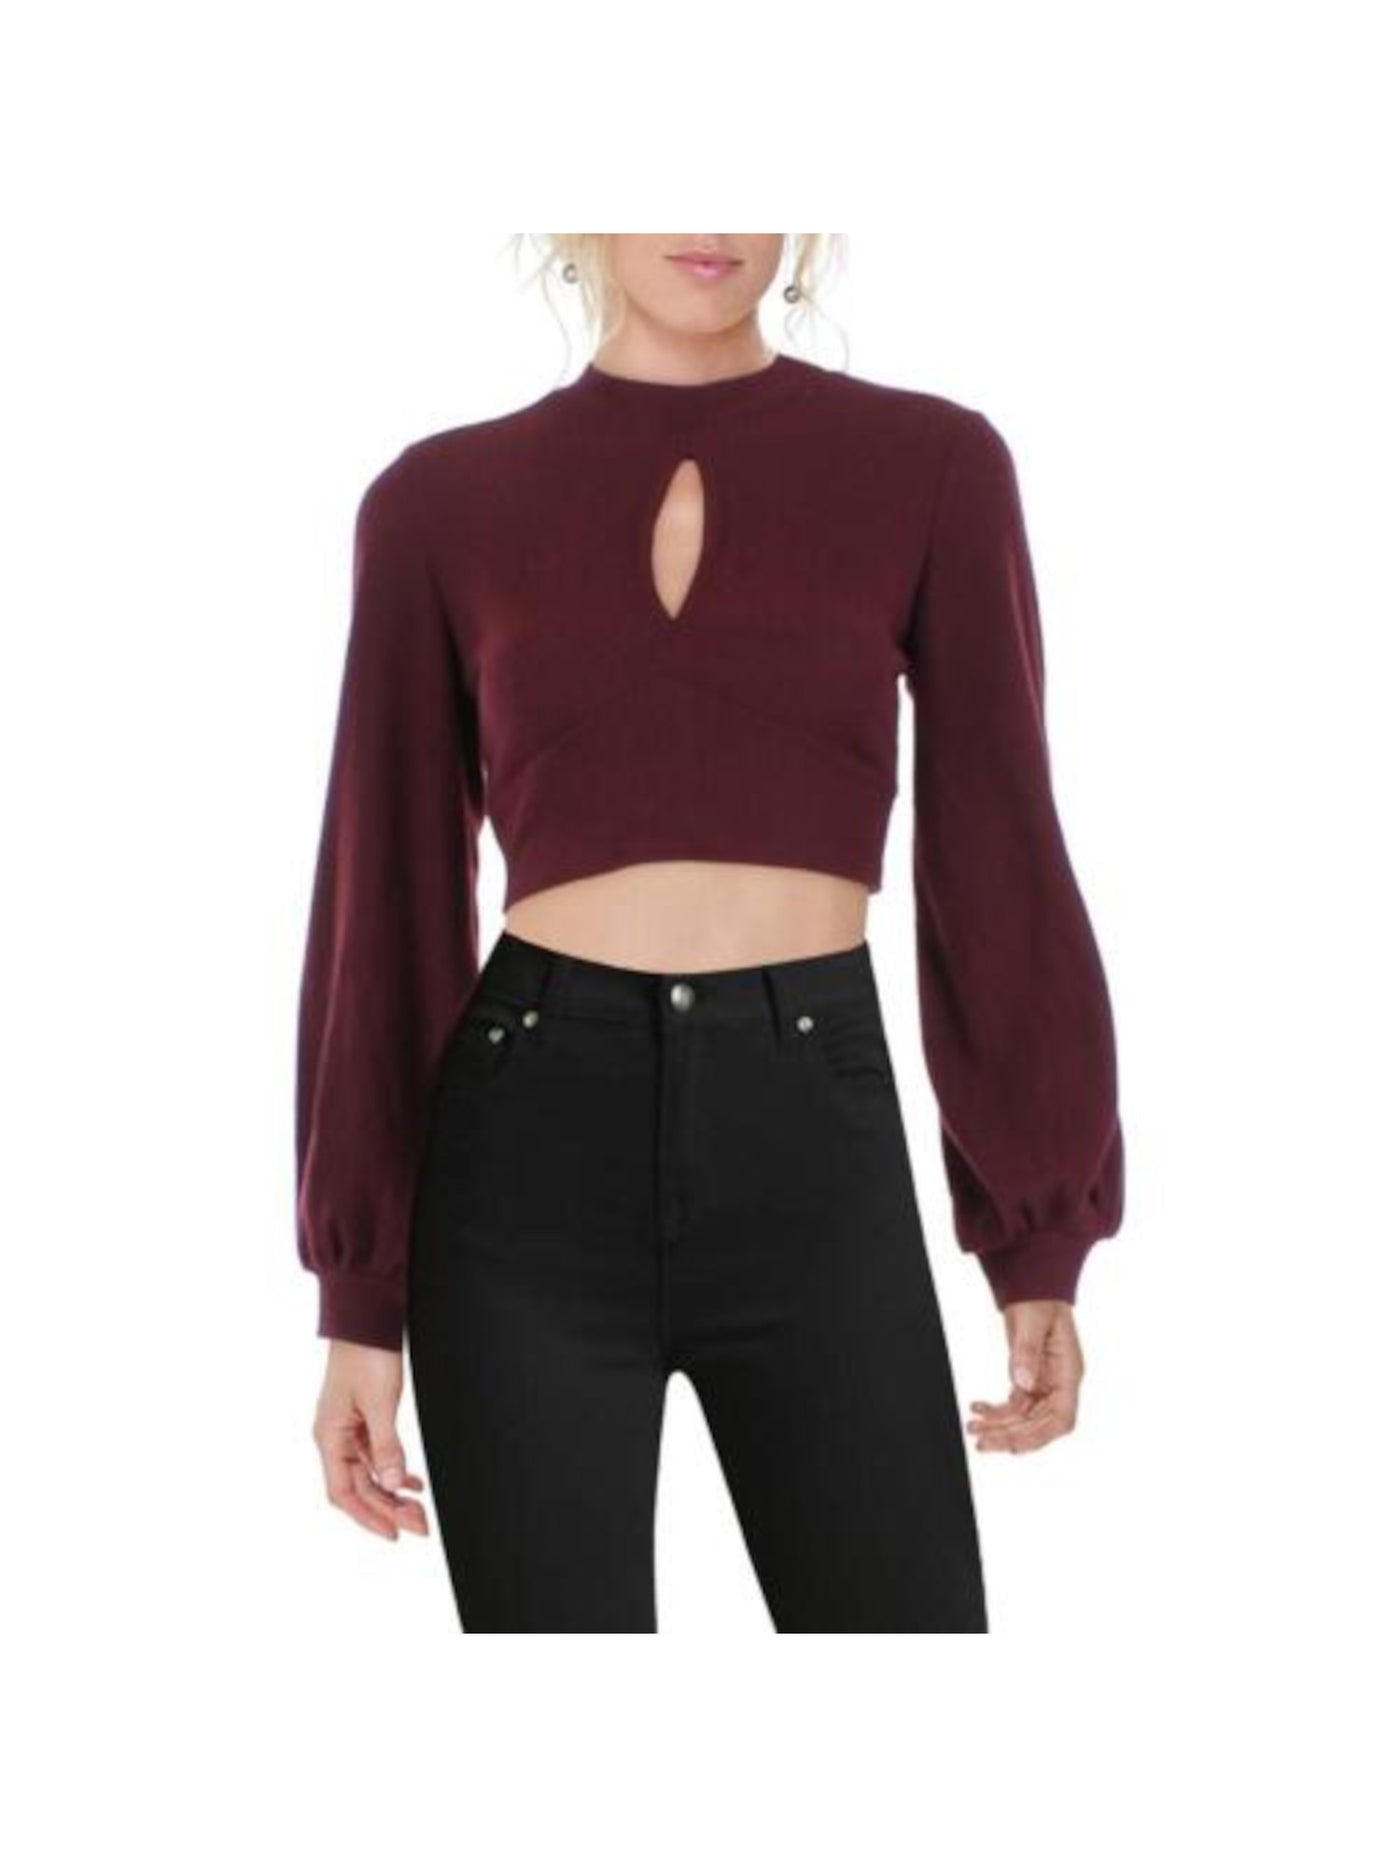 ALMOST FAMOUS Womens Burgundy Ribbed Cut Out Button Top Open Back Tie Hem Balloon Sleeve Mock Neck Crop Top Sweater Juniors L